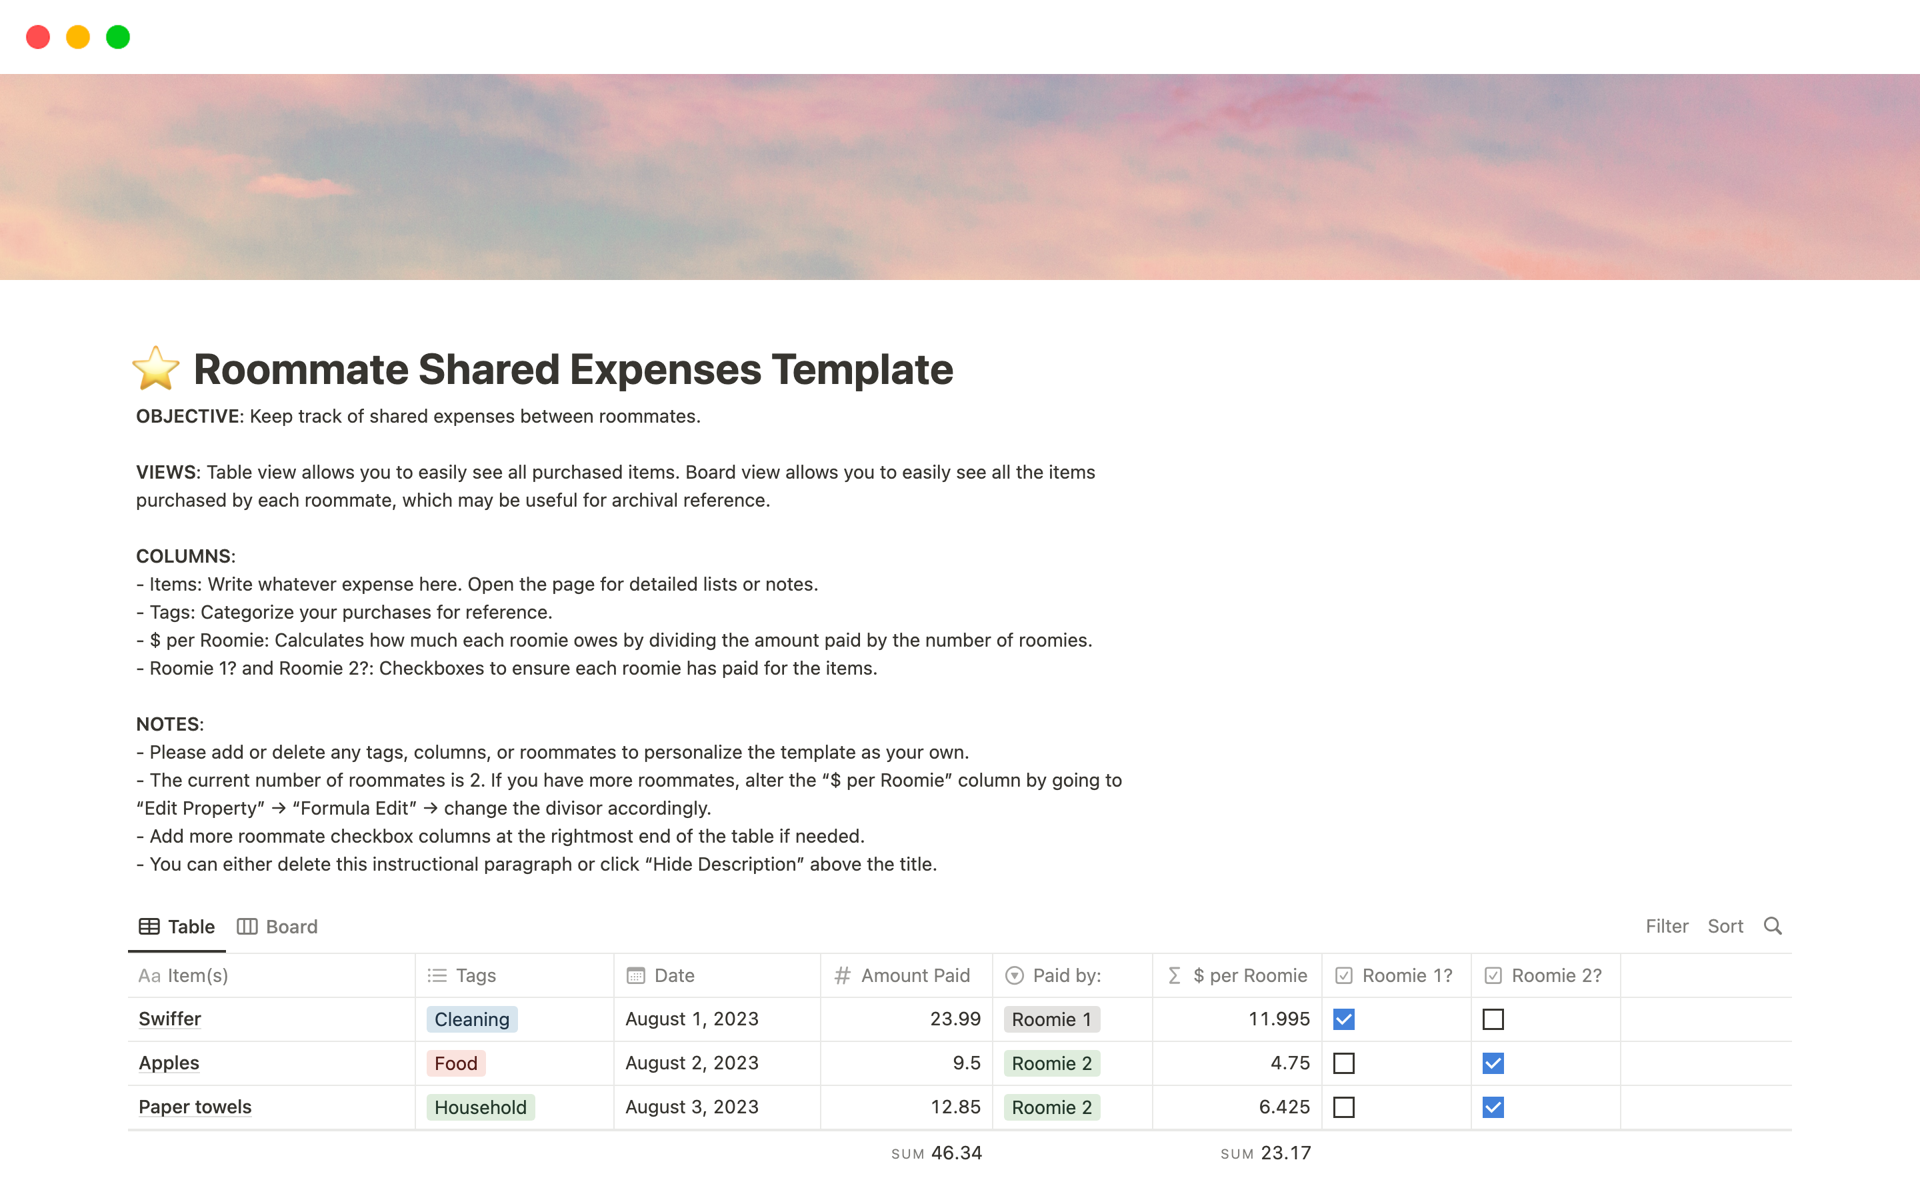 Simple and effective shared expenses tracker template for roommates.